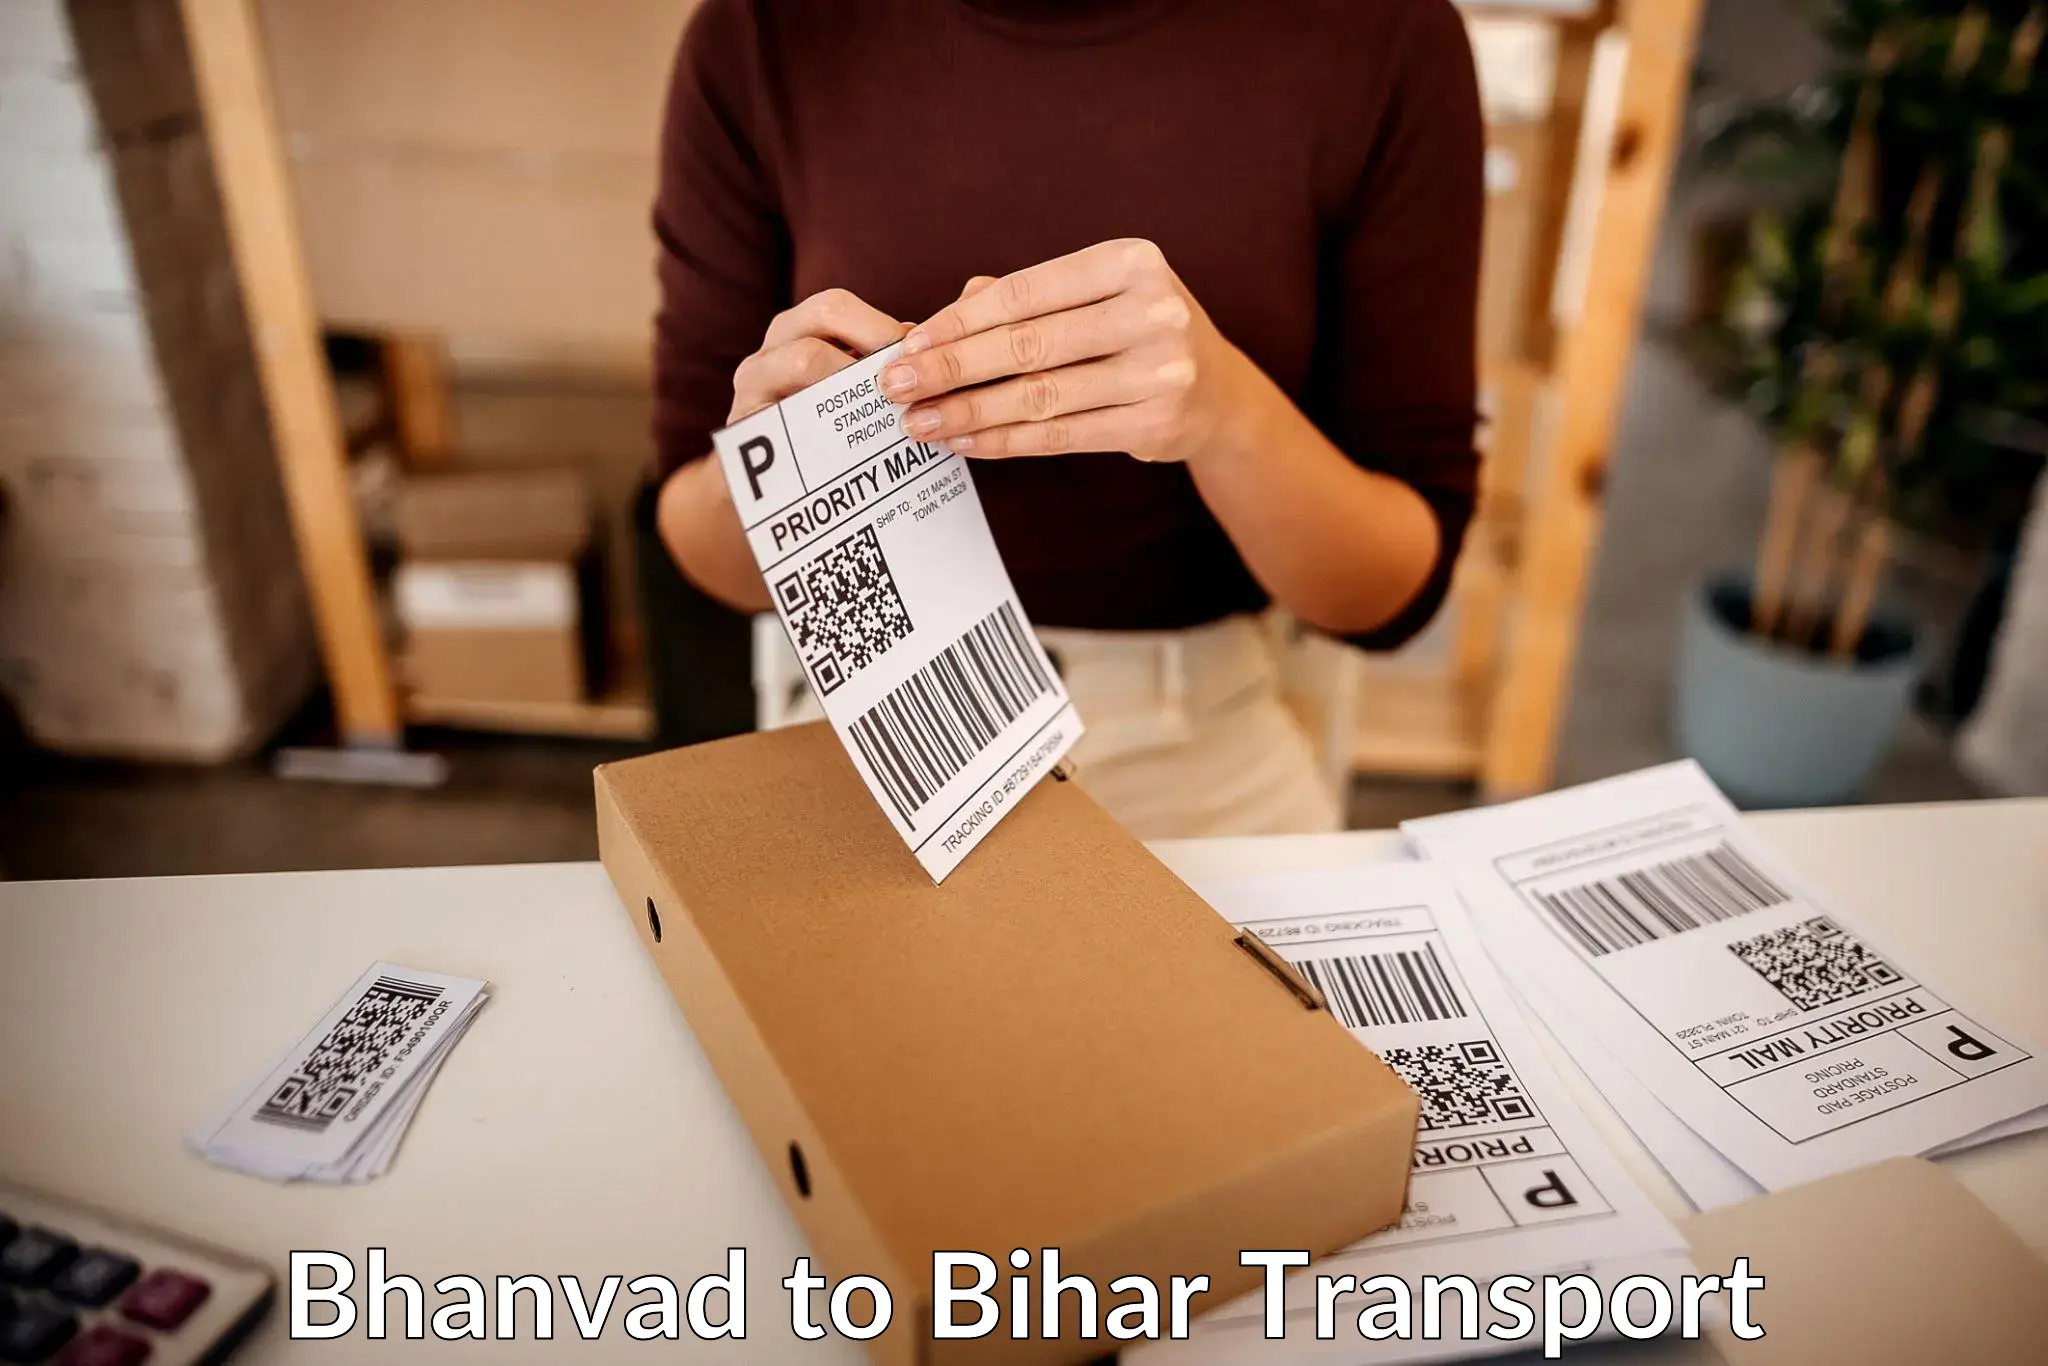 Delivery service Bhanvad to Bihta